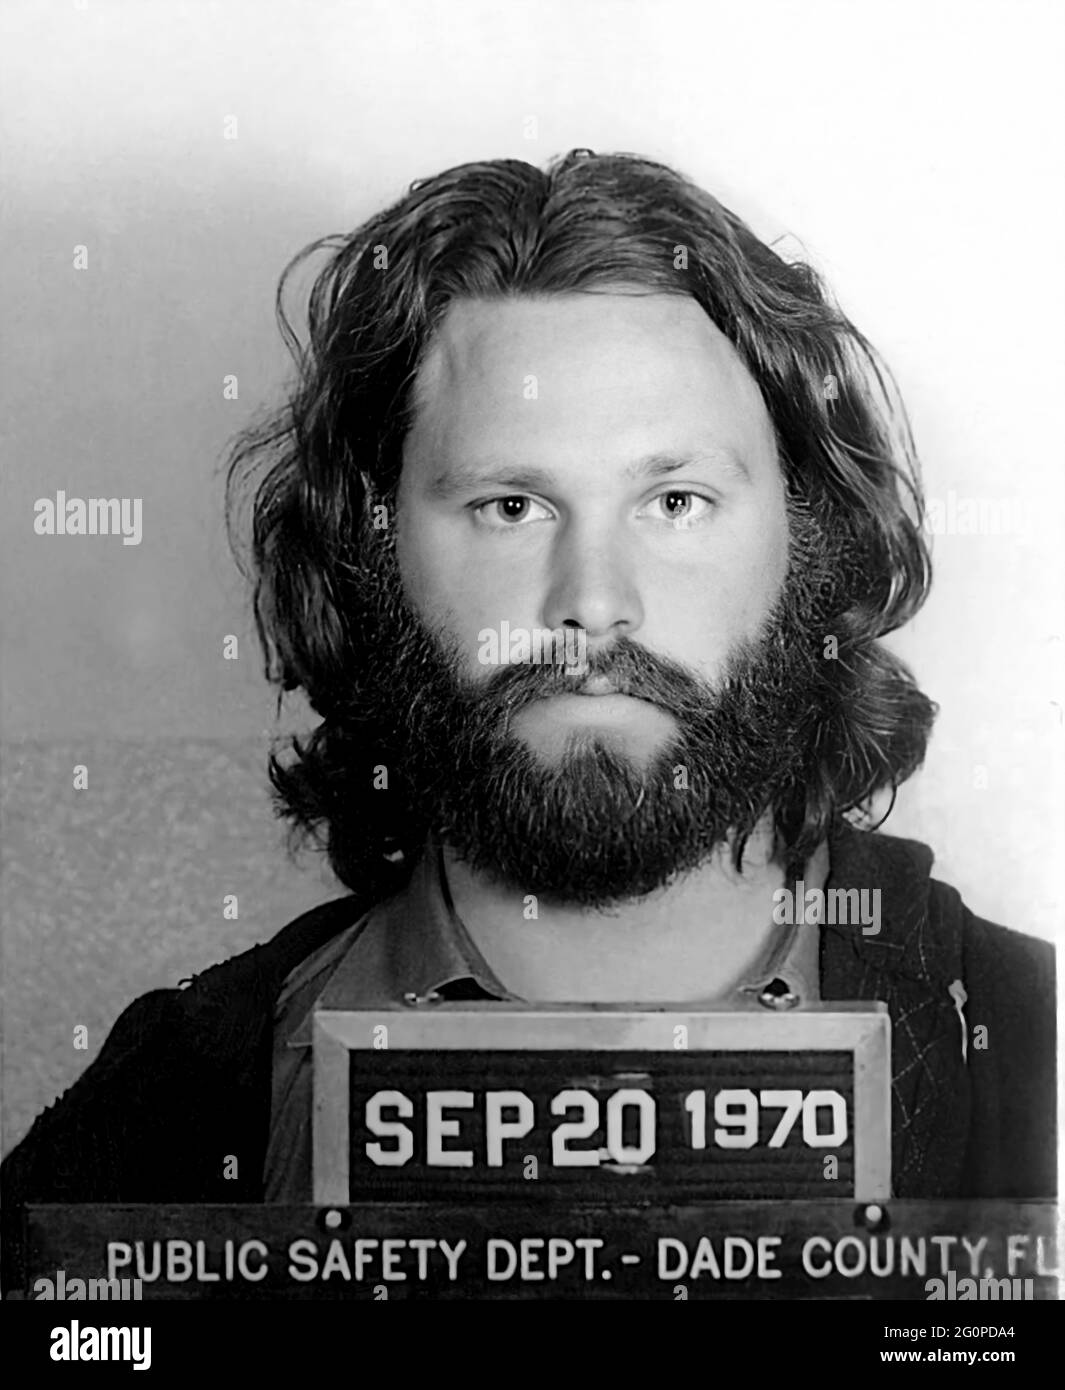 1970, 20 september, Dade County , FLORIDA , USA : The celebrated Rockstar singer and composer JIM MORRISON ( 1943 - 1971 ) of THE DOORS ( founded in 1965 ) when was arrested by Police Department in the official mug-shot . Jim had been charged  on misdemeanor indecent exposure and profanity charges . The singer was busted after he exposed himself during a March 1969 concert in Miami . Unknown photographer , Dade County's Public Safety Department . - HISTORY - FOTO STORICHE  - MUSIC - MUSICA - cantante - COMPOSITORE - ROCK STAR - ARRESTO - Arrestation - ARRESTATO DALLA POLIZIA - FOTO SEGNALETICA Stock Photo